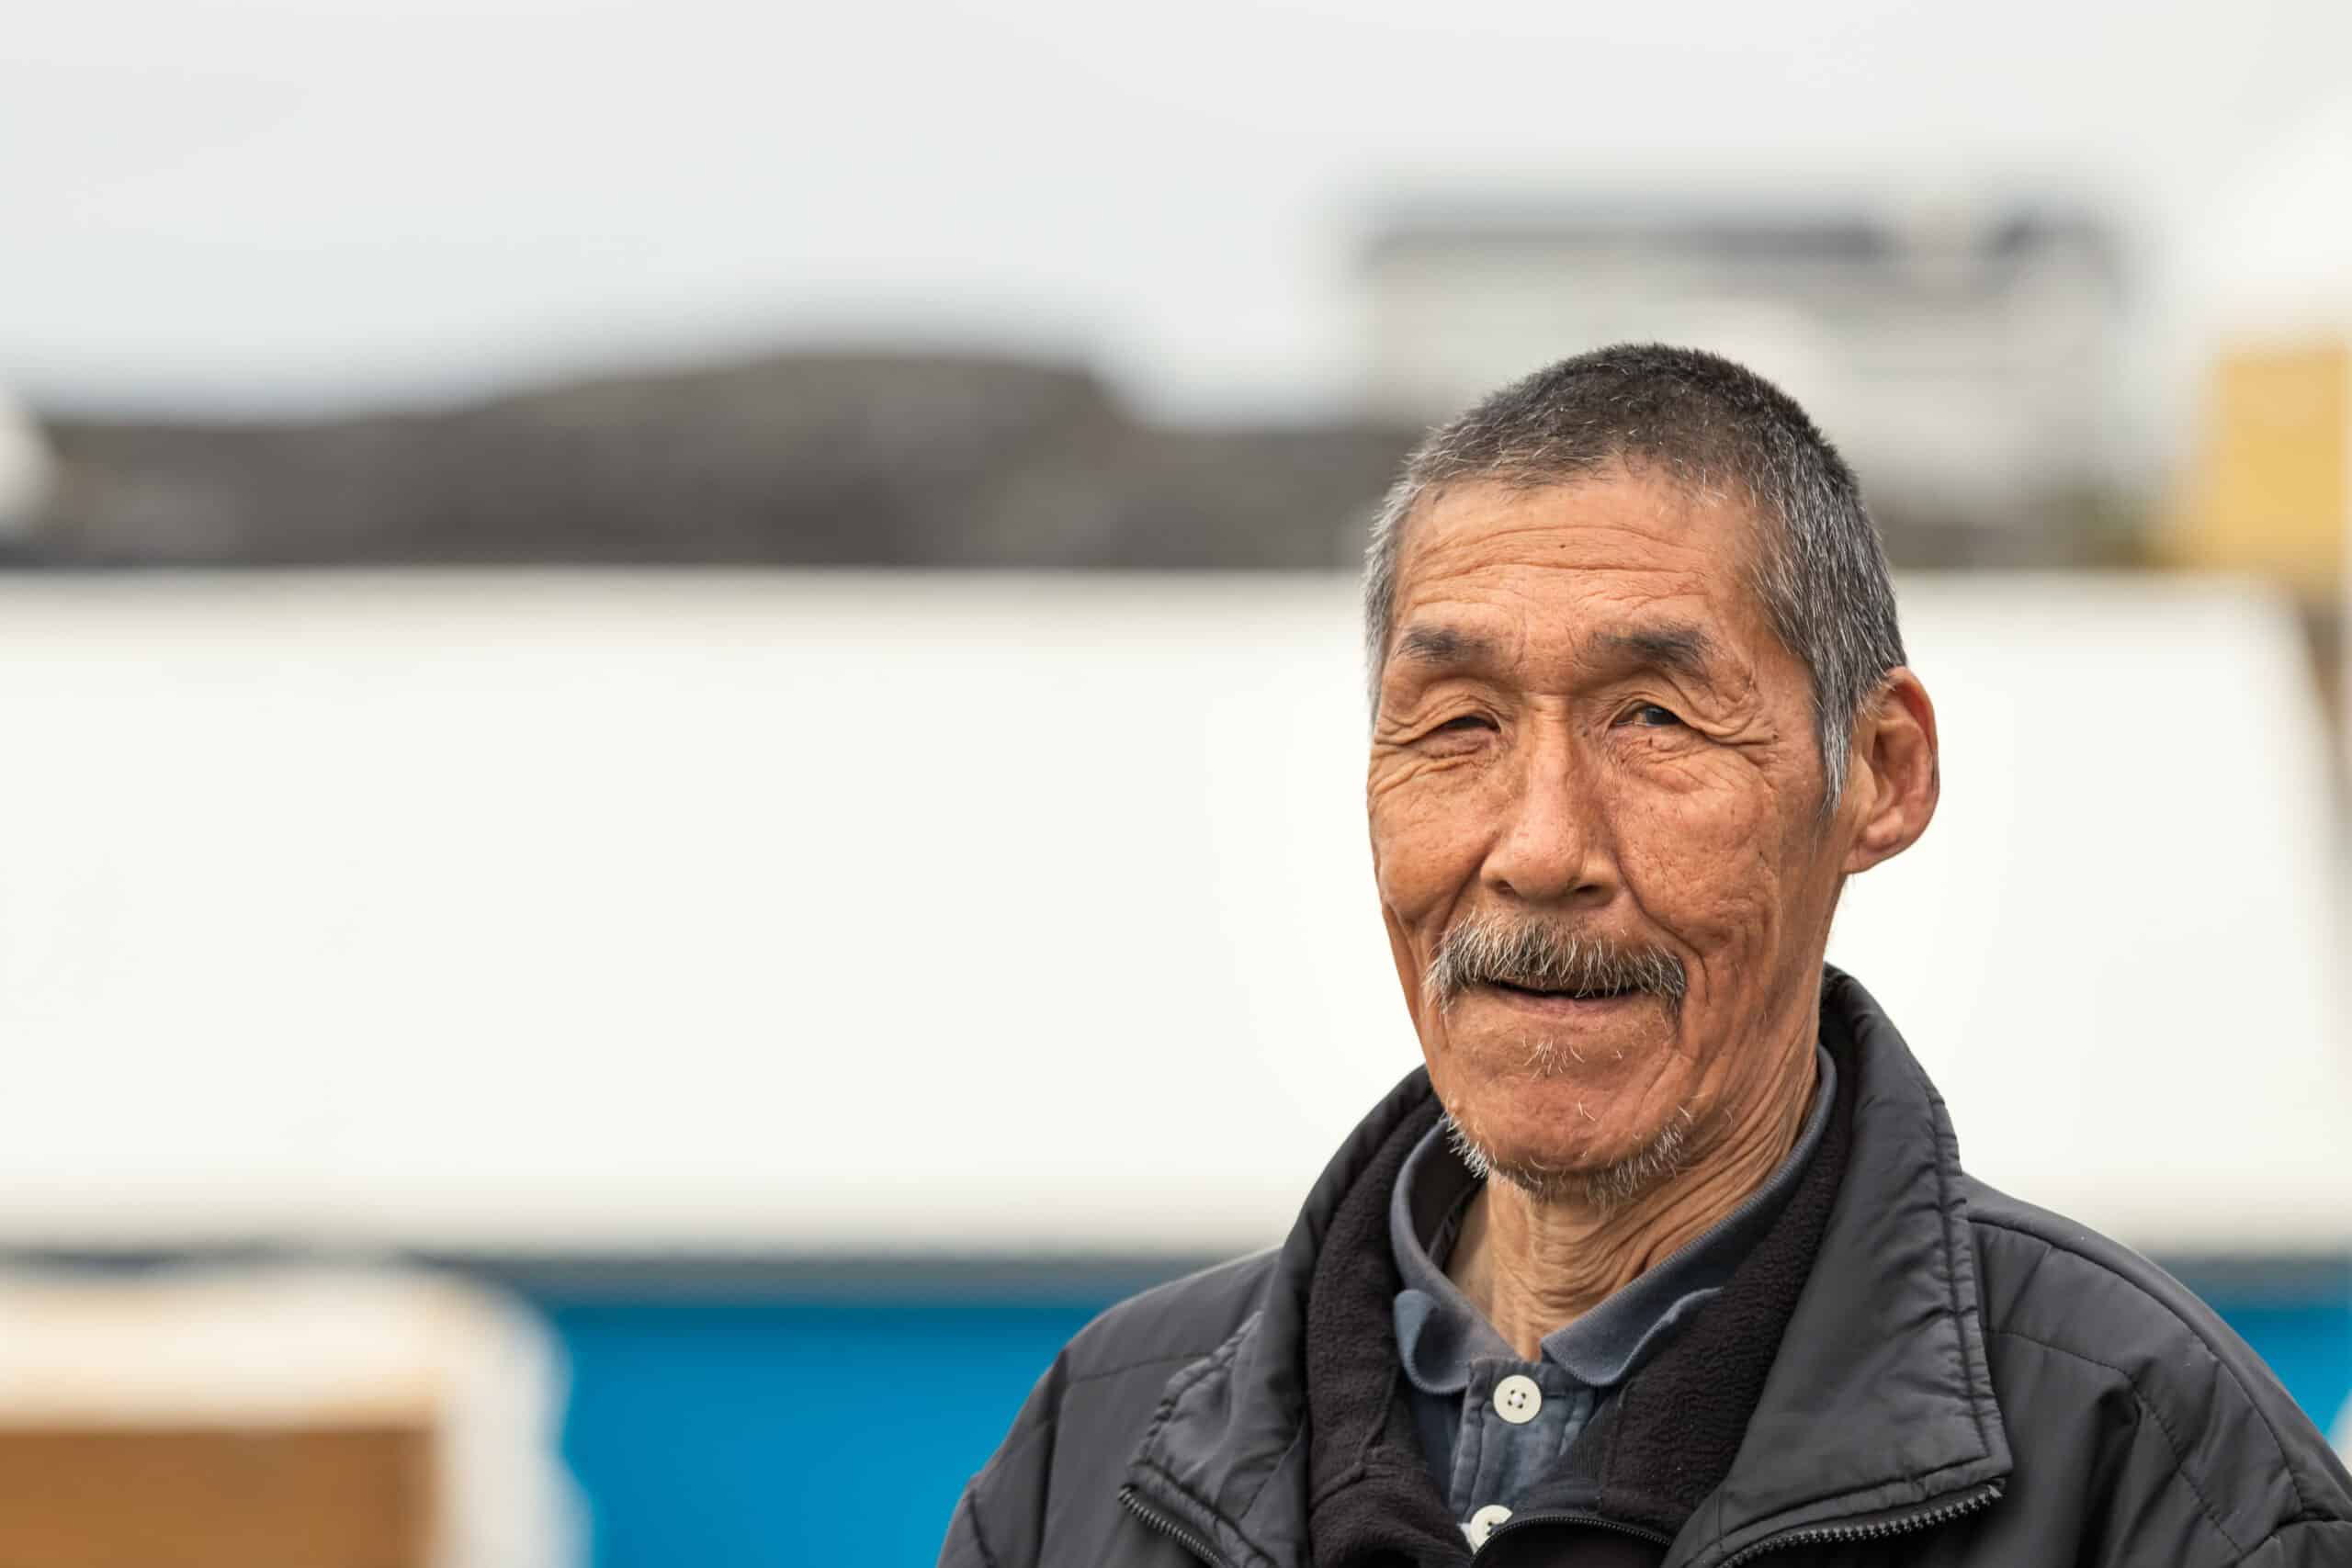 Nuuk, Greenland - August 16, 2019: Portrait of an Inuit local mature man looking camera in Nuuk, Greenland.